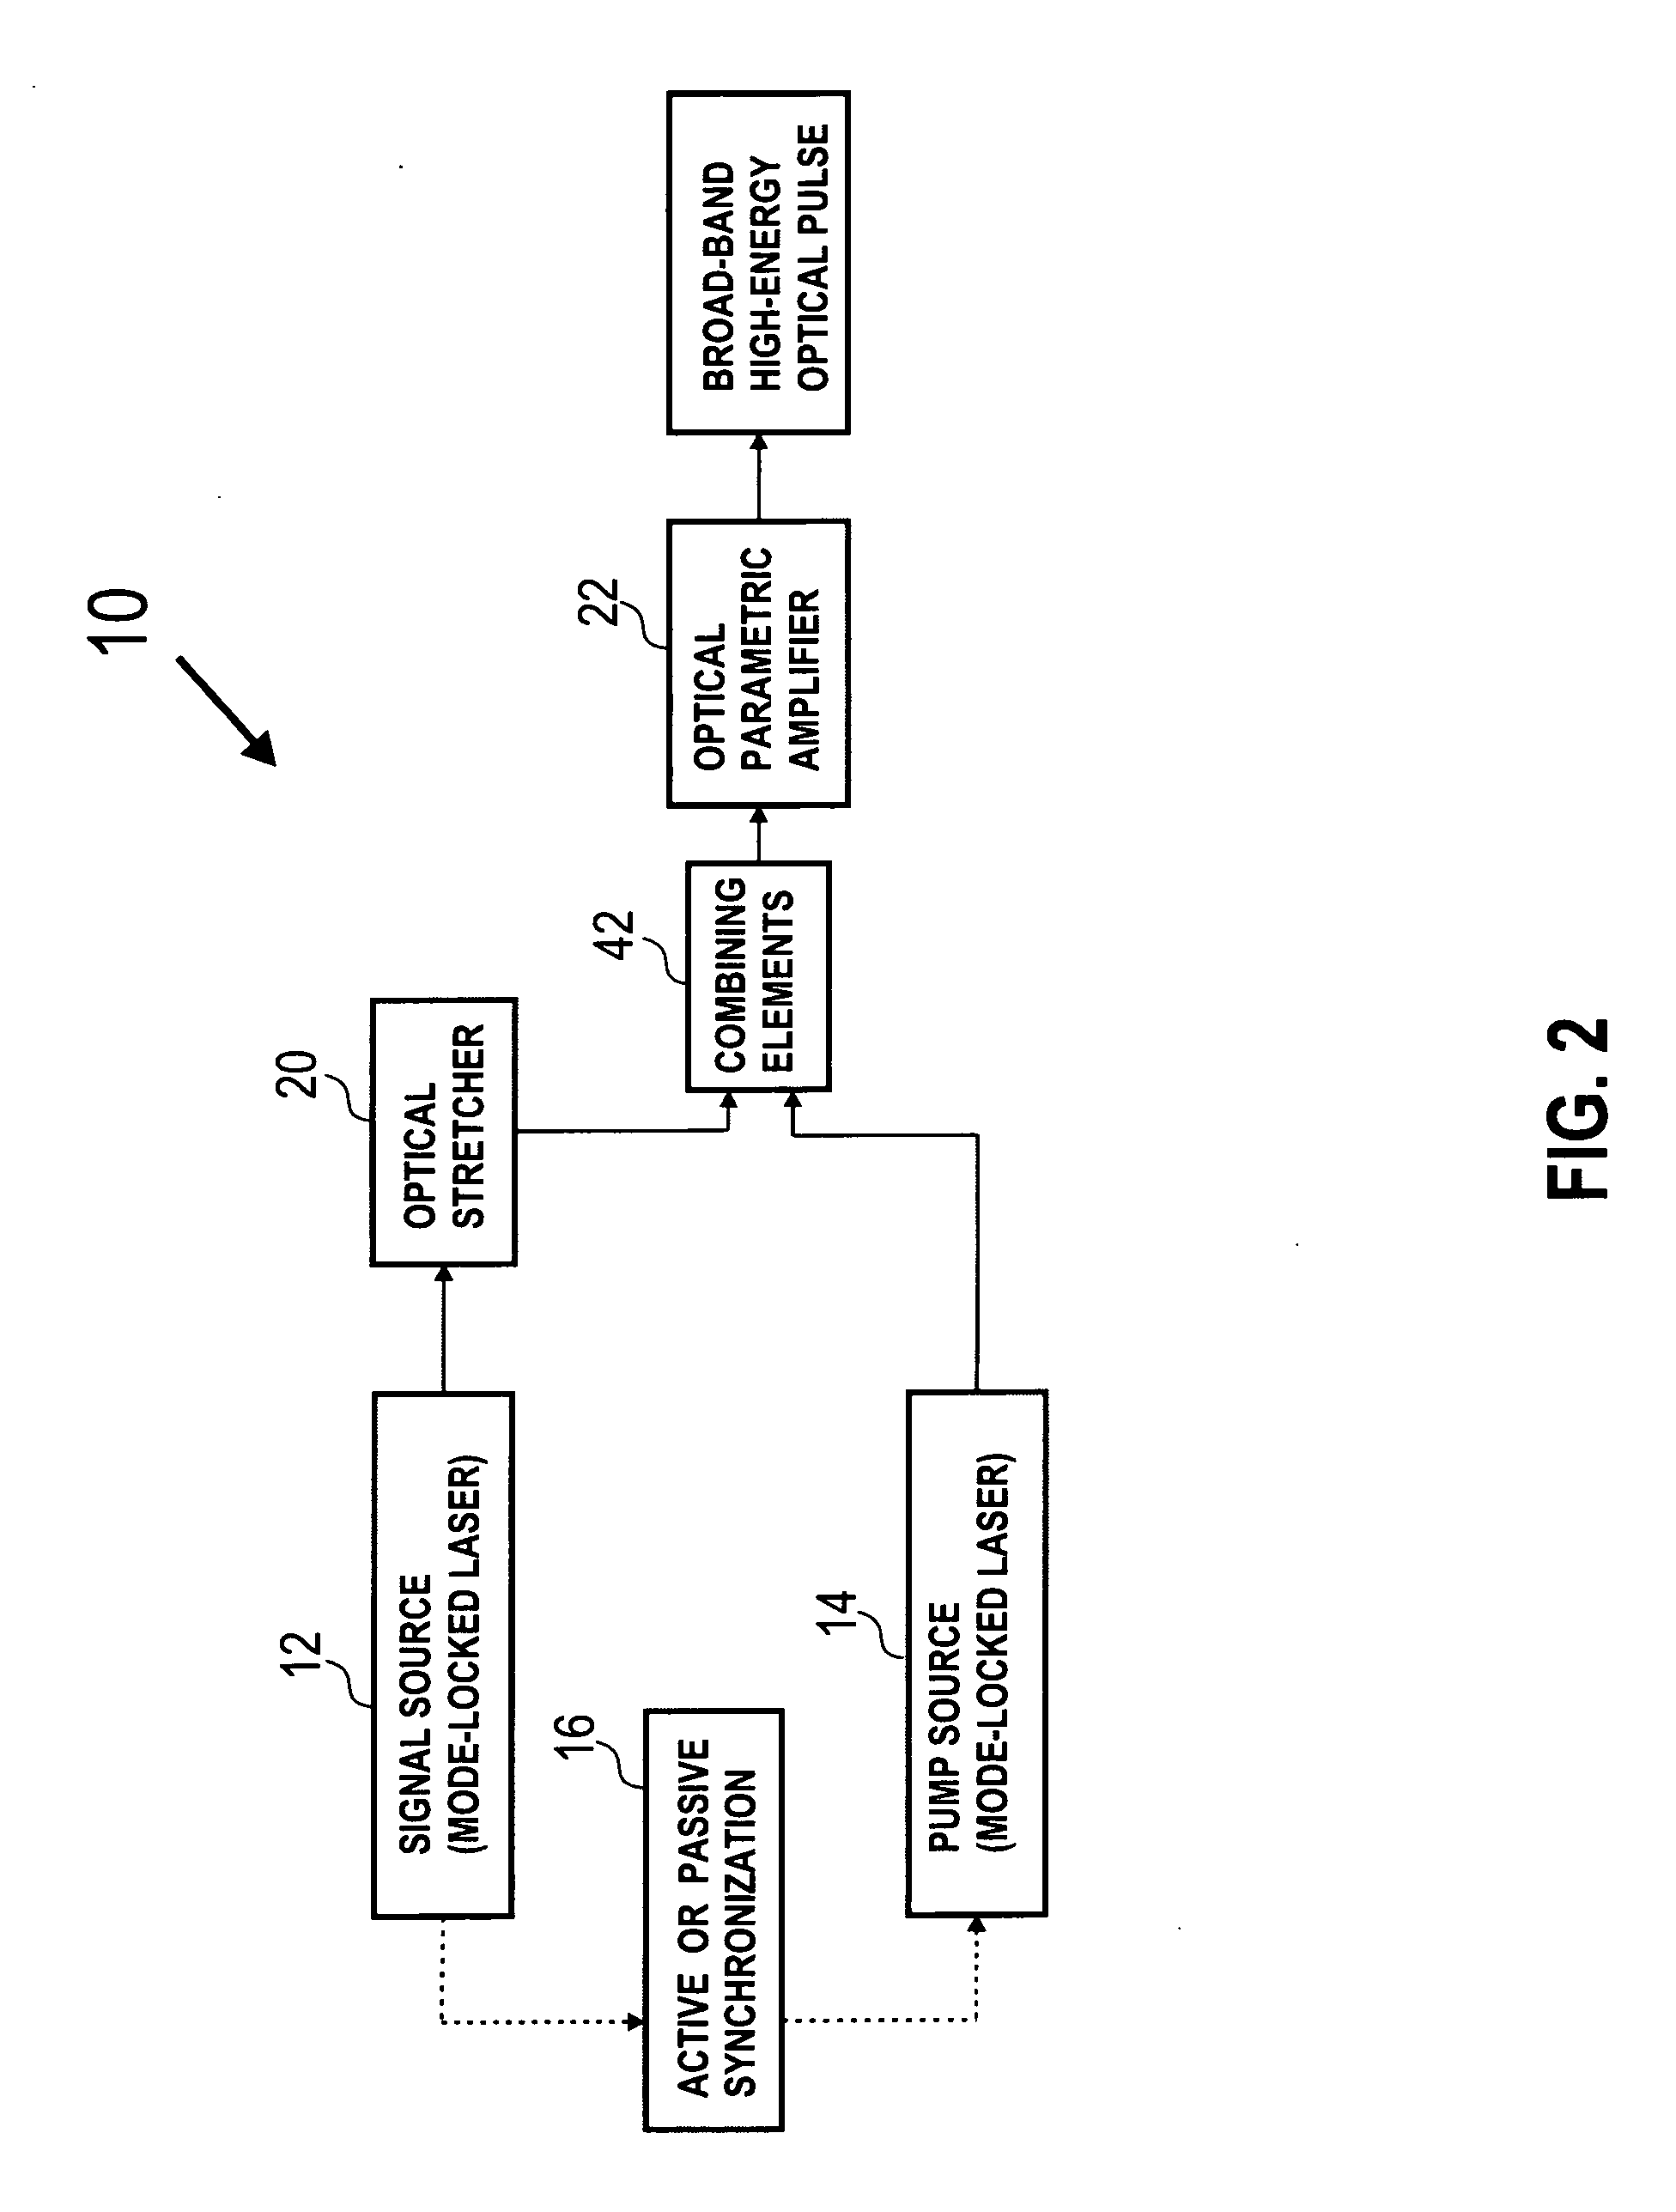 Method and apparatus for high power optical amplification in the infrared wavelength range (0.7-20 mum)